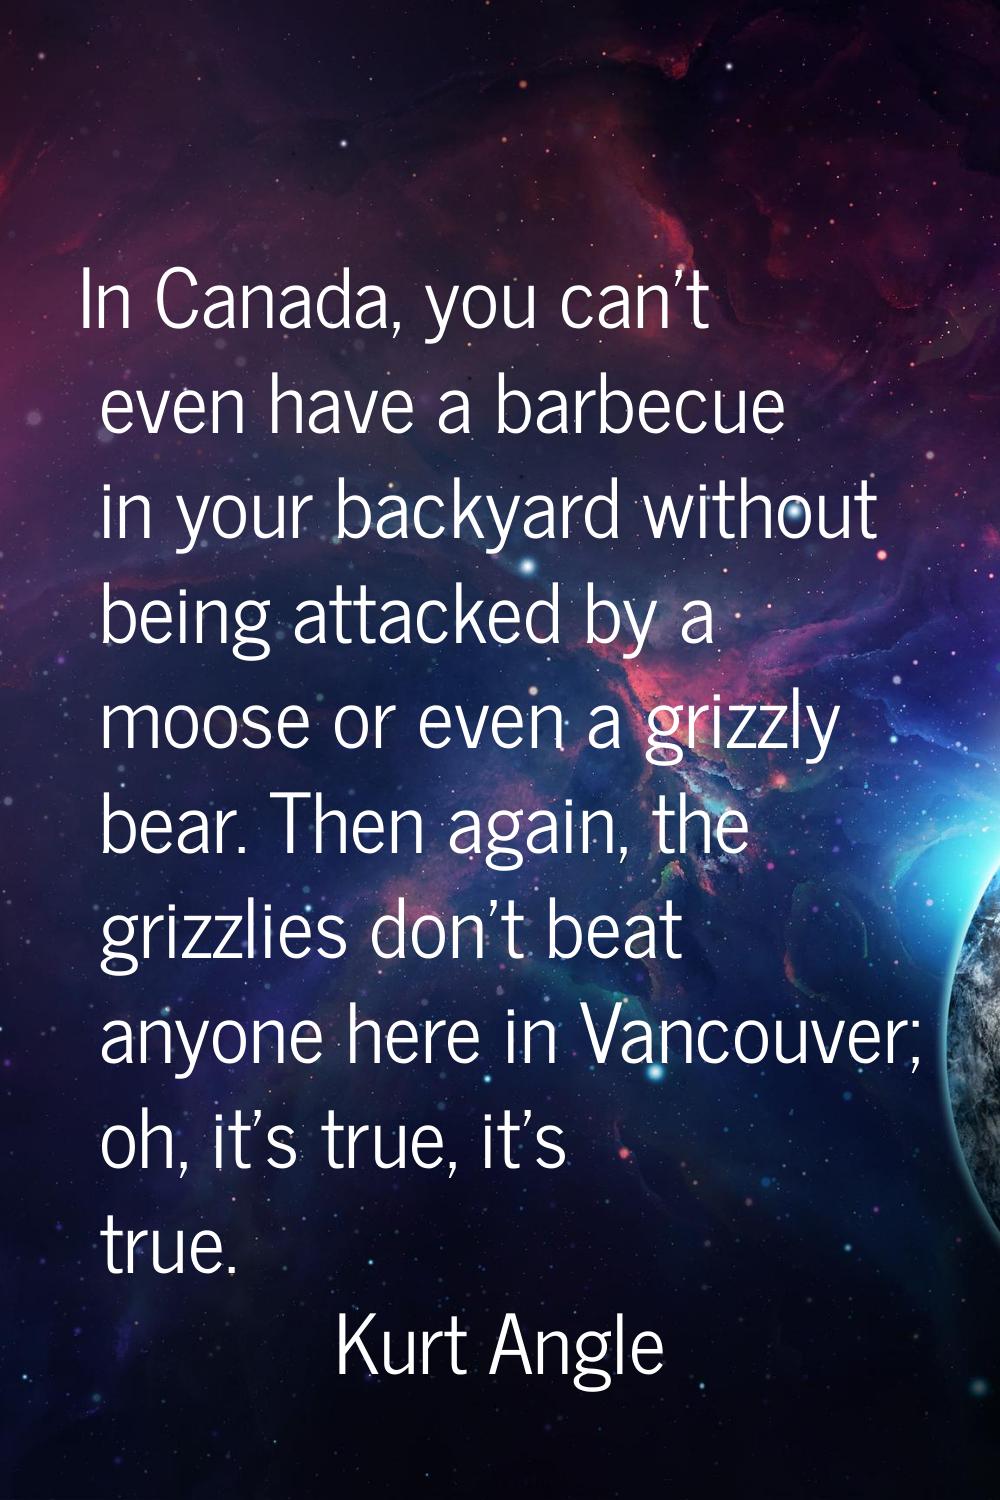 In Canada, you can't even have a barbecue in your backyard without being attacked by a moose or eve